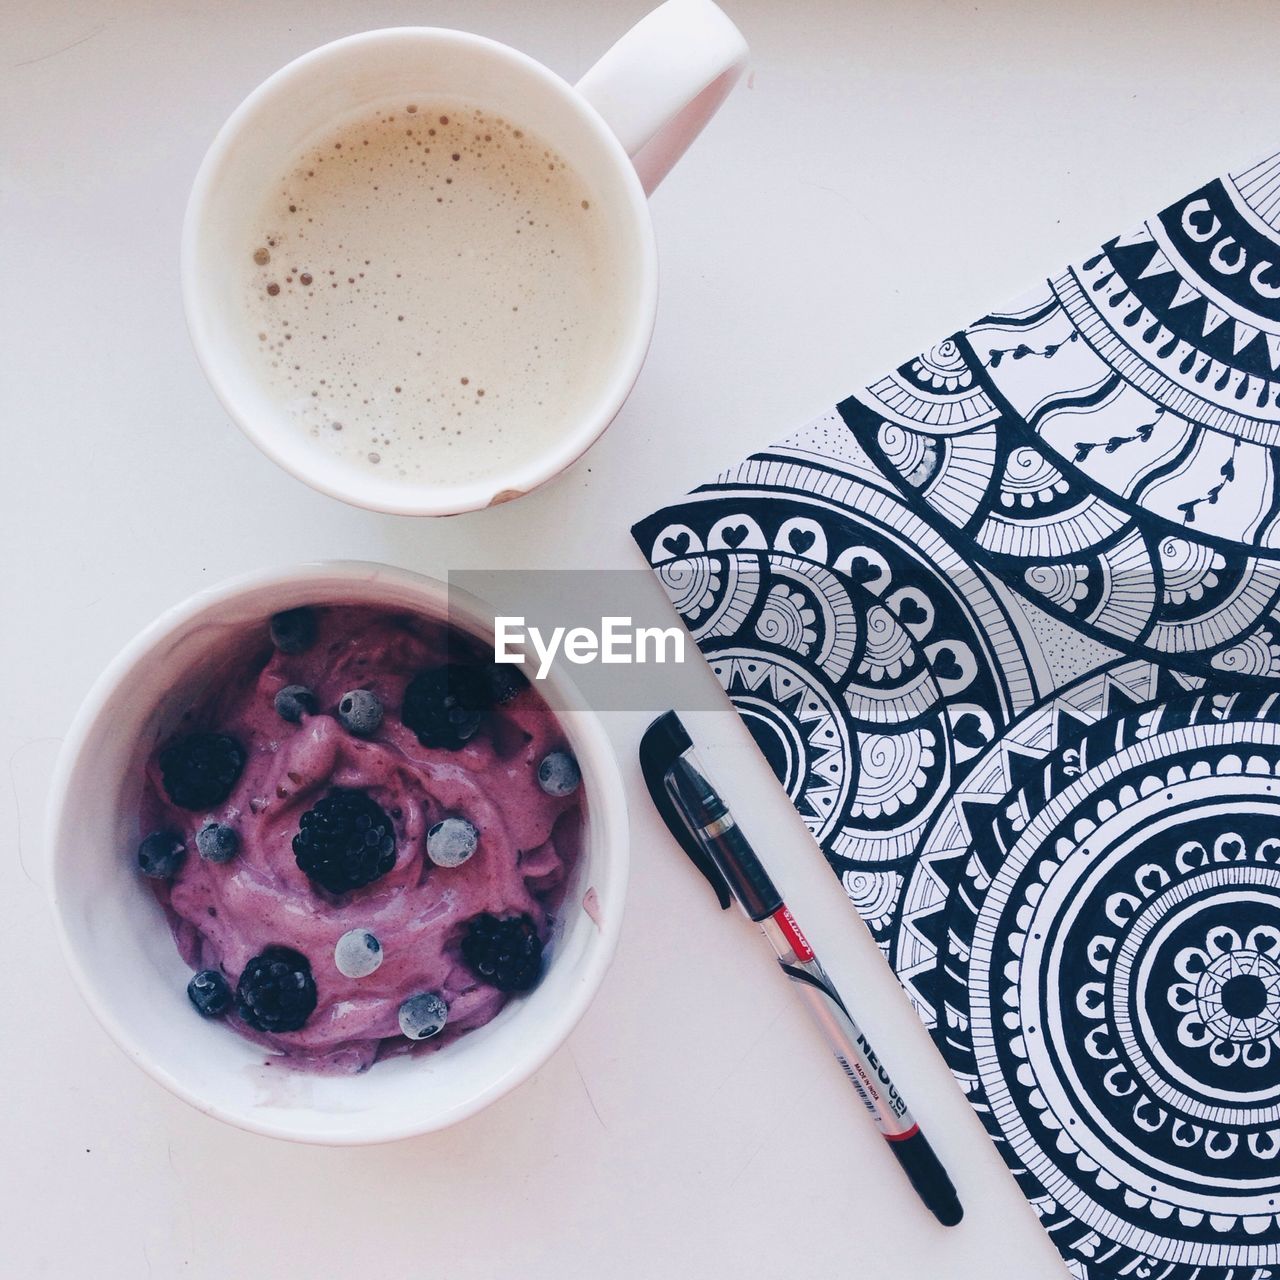 High angle view of berry yogurt with coffee cup and note pad on table